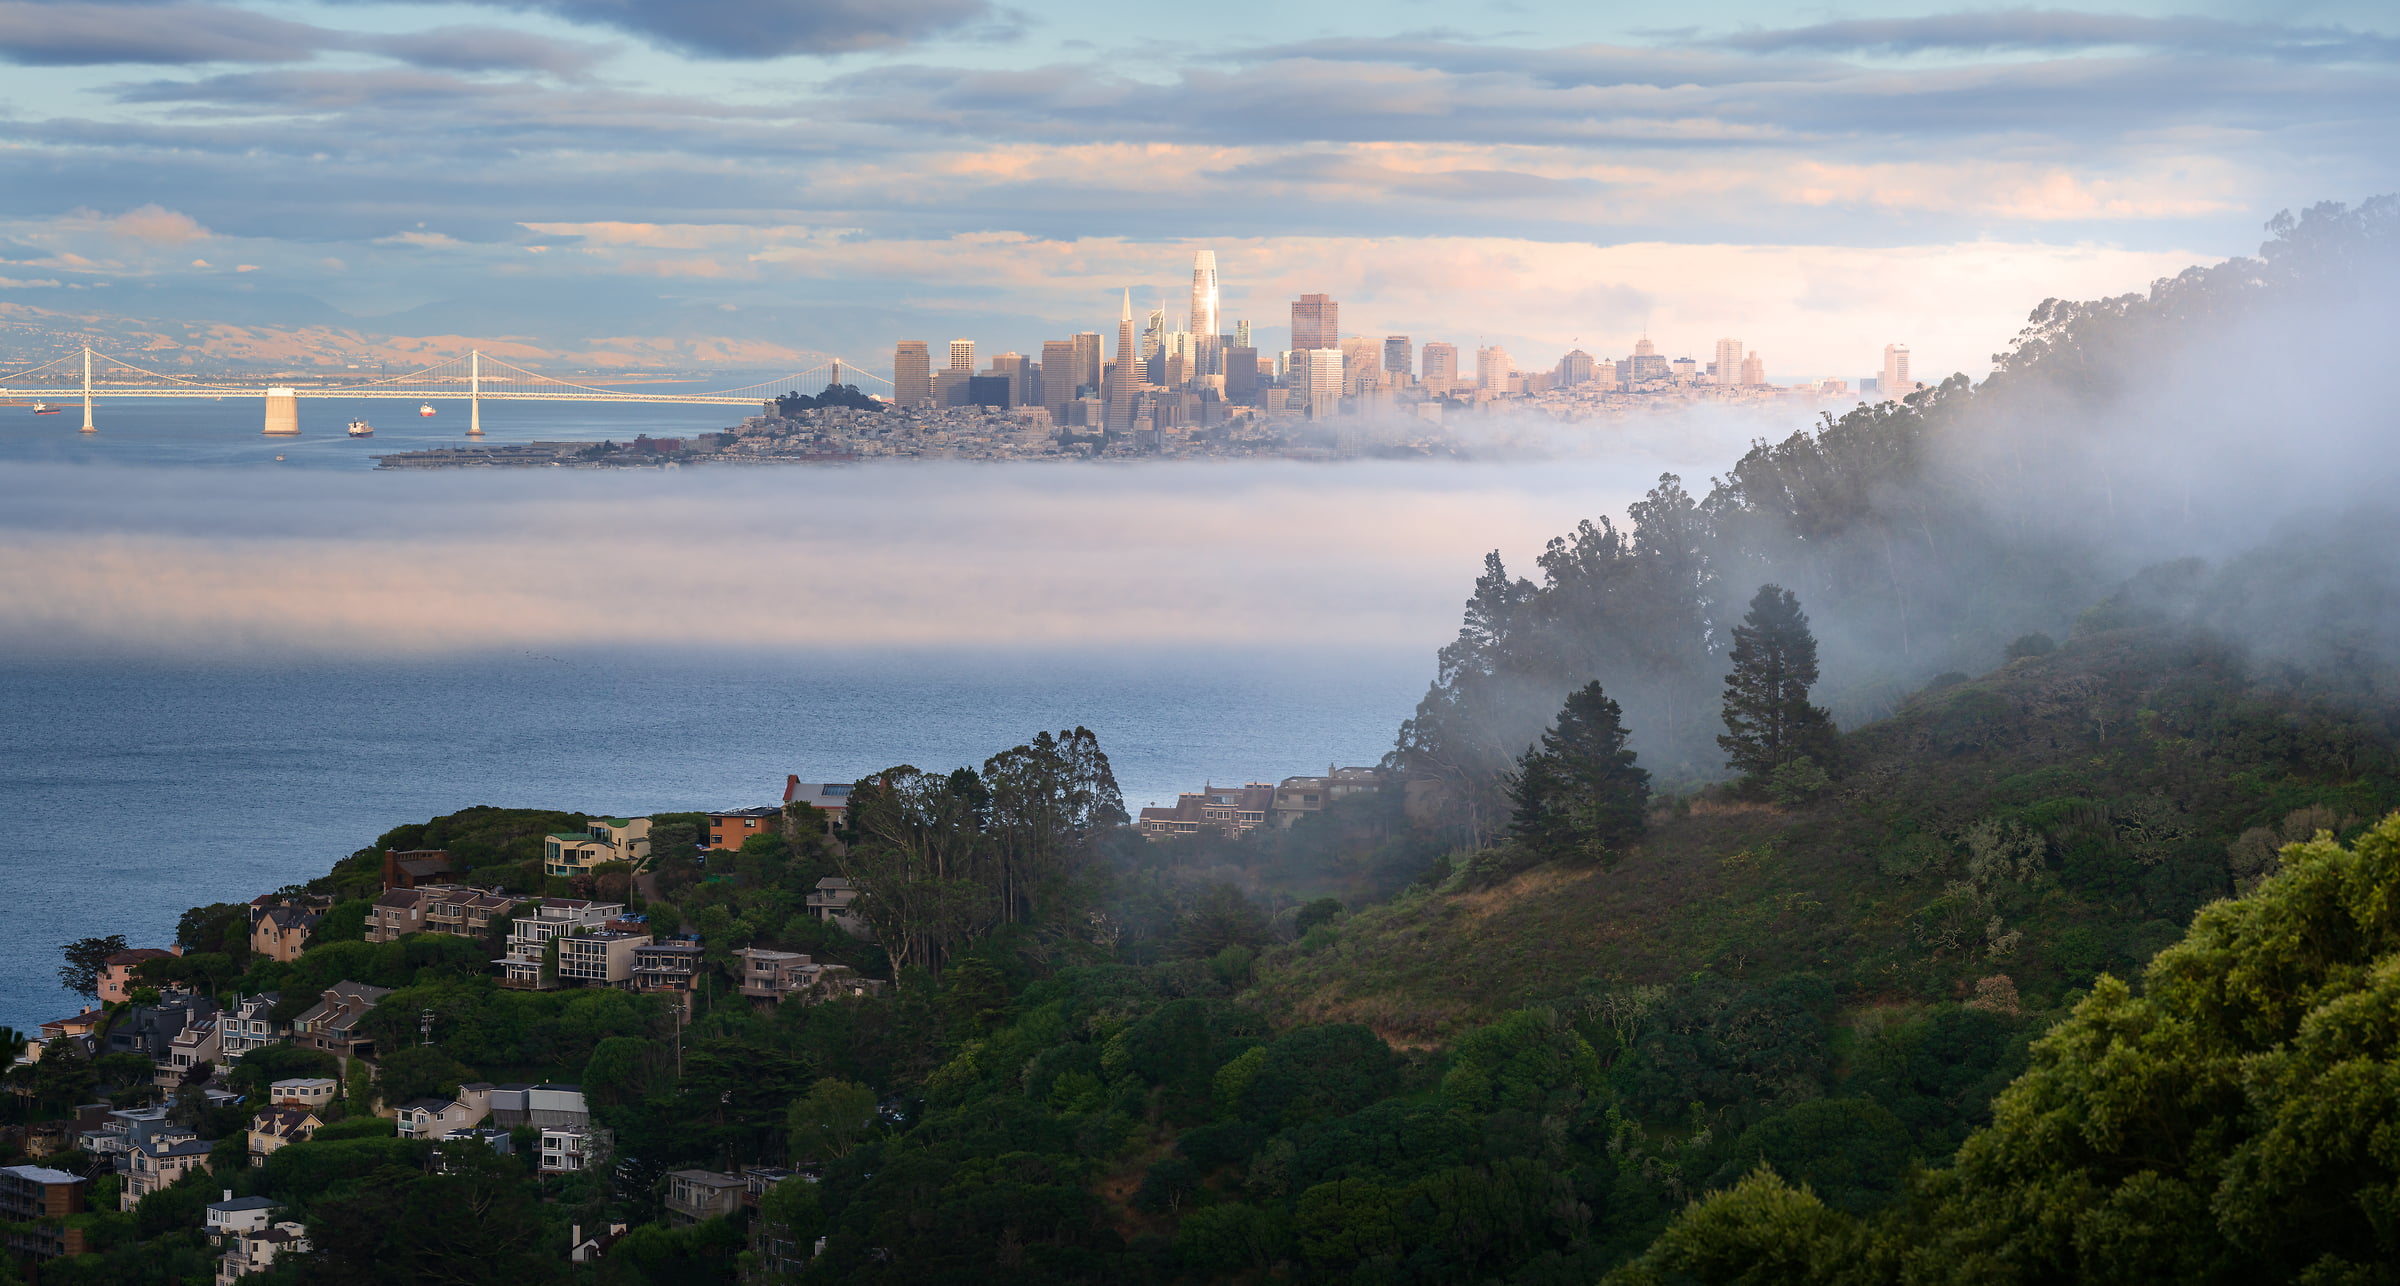 199 megapixels! A very high resolution, large-format VAST photo print of San Francisco and Sausalito at evening with fog; landscape and cityscape photograph created by Jeff Lewis in Sausalito, California